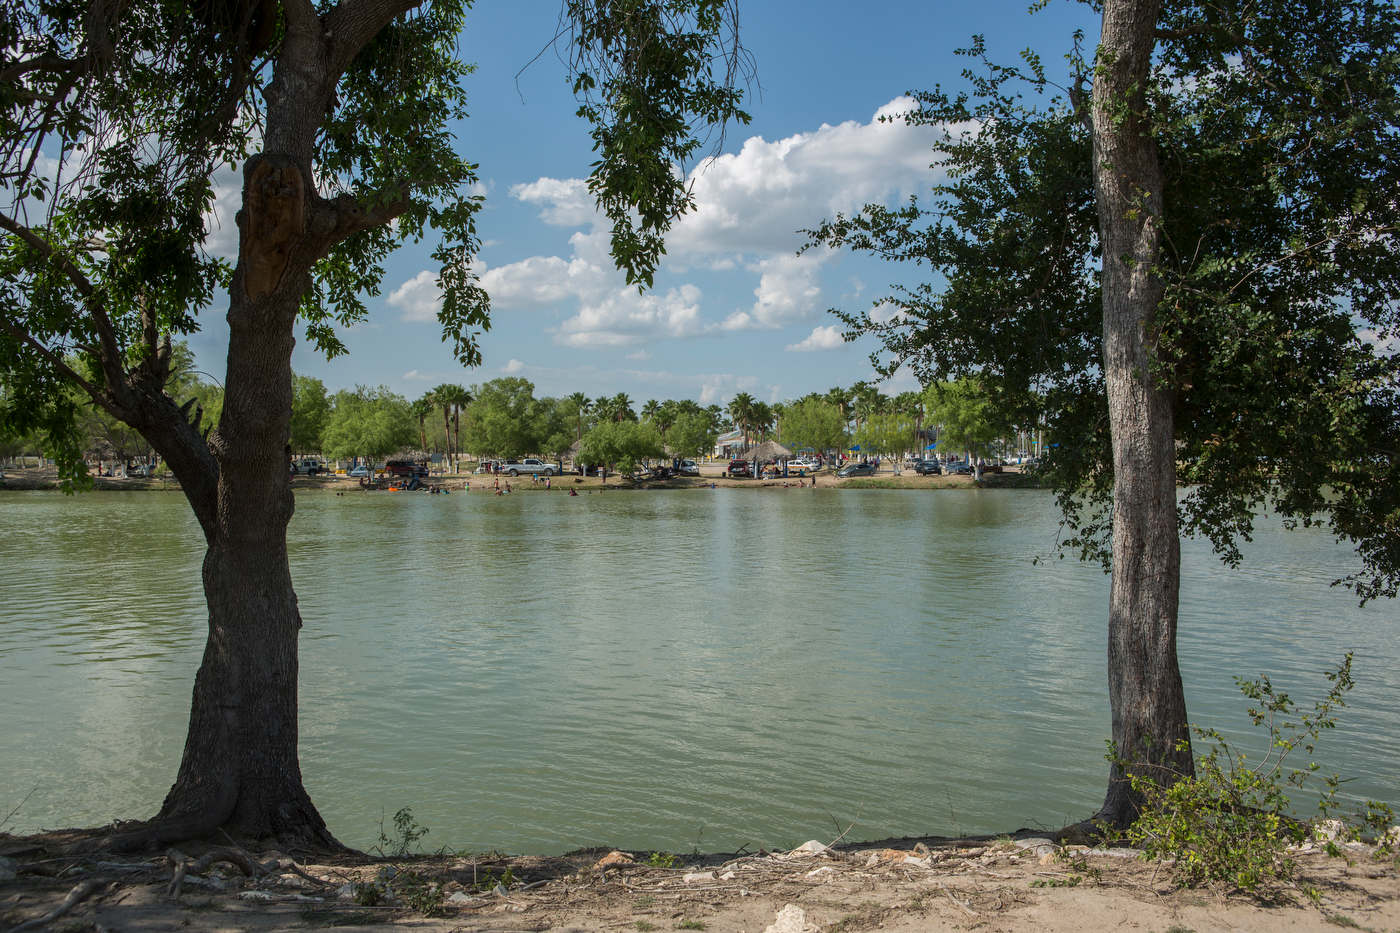 From Anzalduas Park, in the U.S., one can hear music and laughter from the Mexicam familes swimming in the Rio Grande.